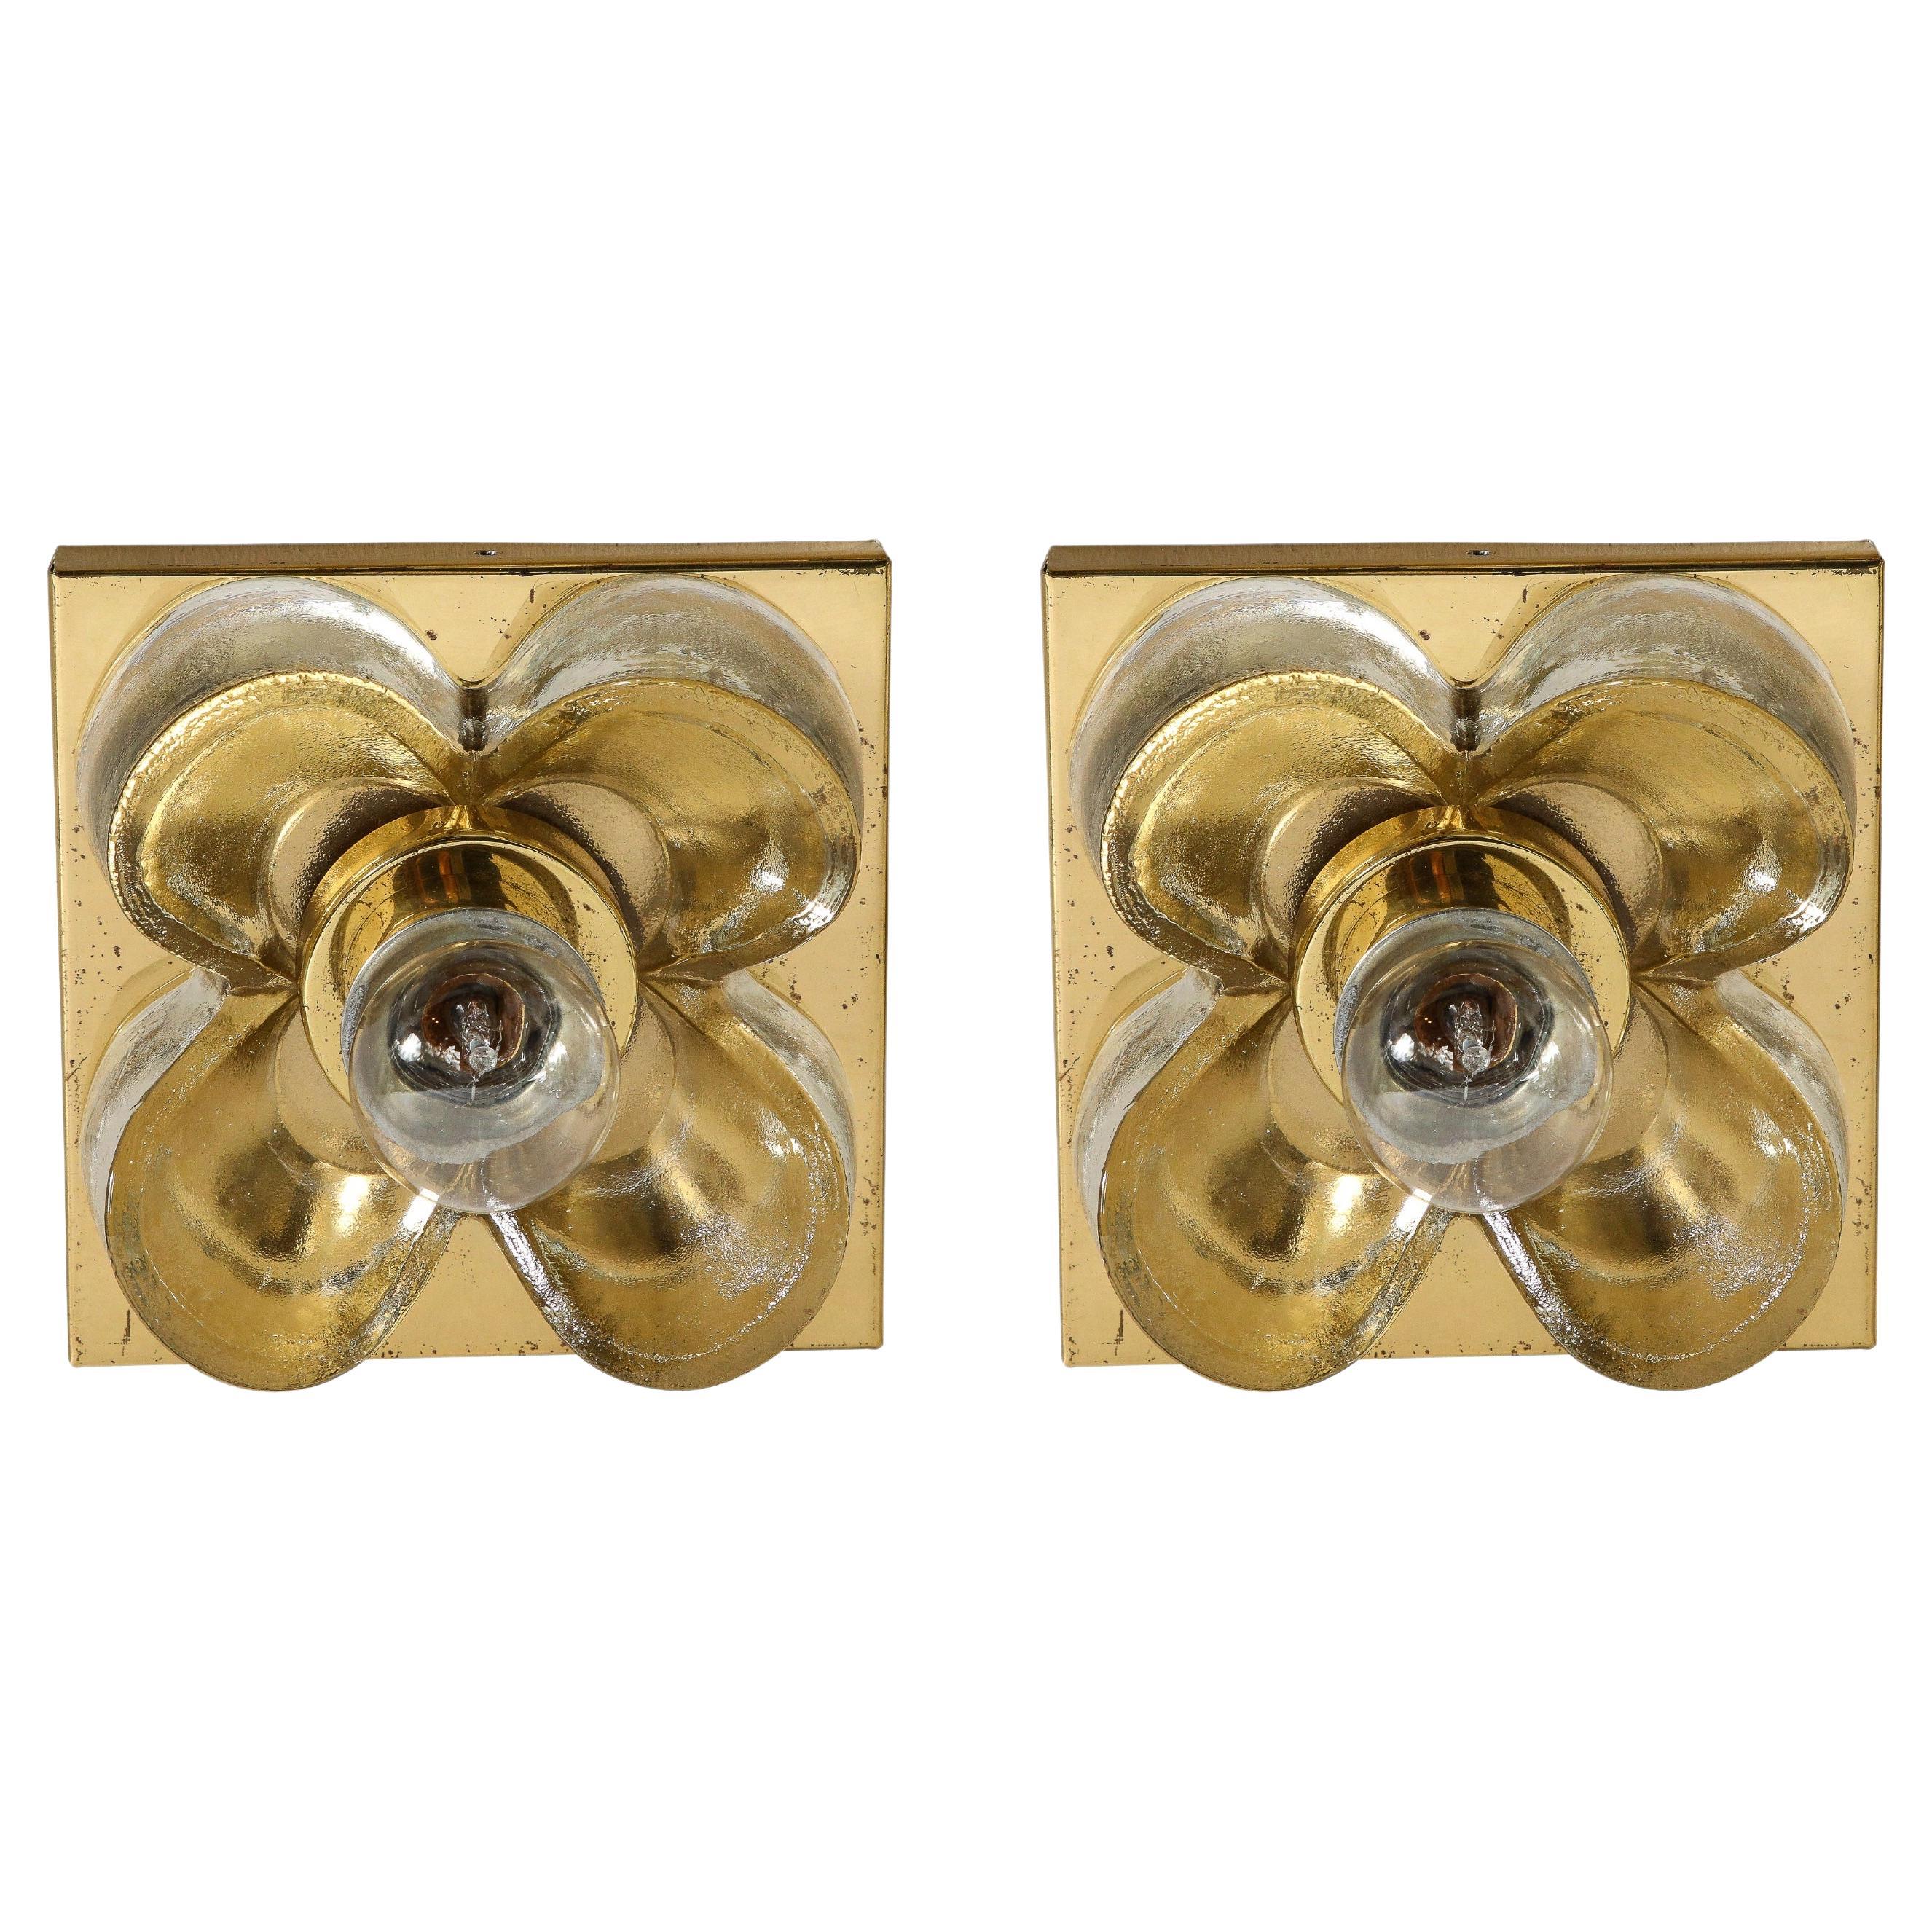 Pair of Mid-Century Modernist Petite Brass & Mottled Glass Sconces by Sische